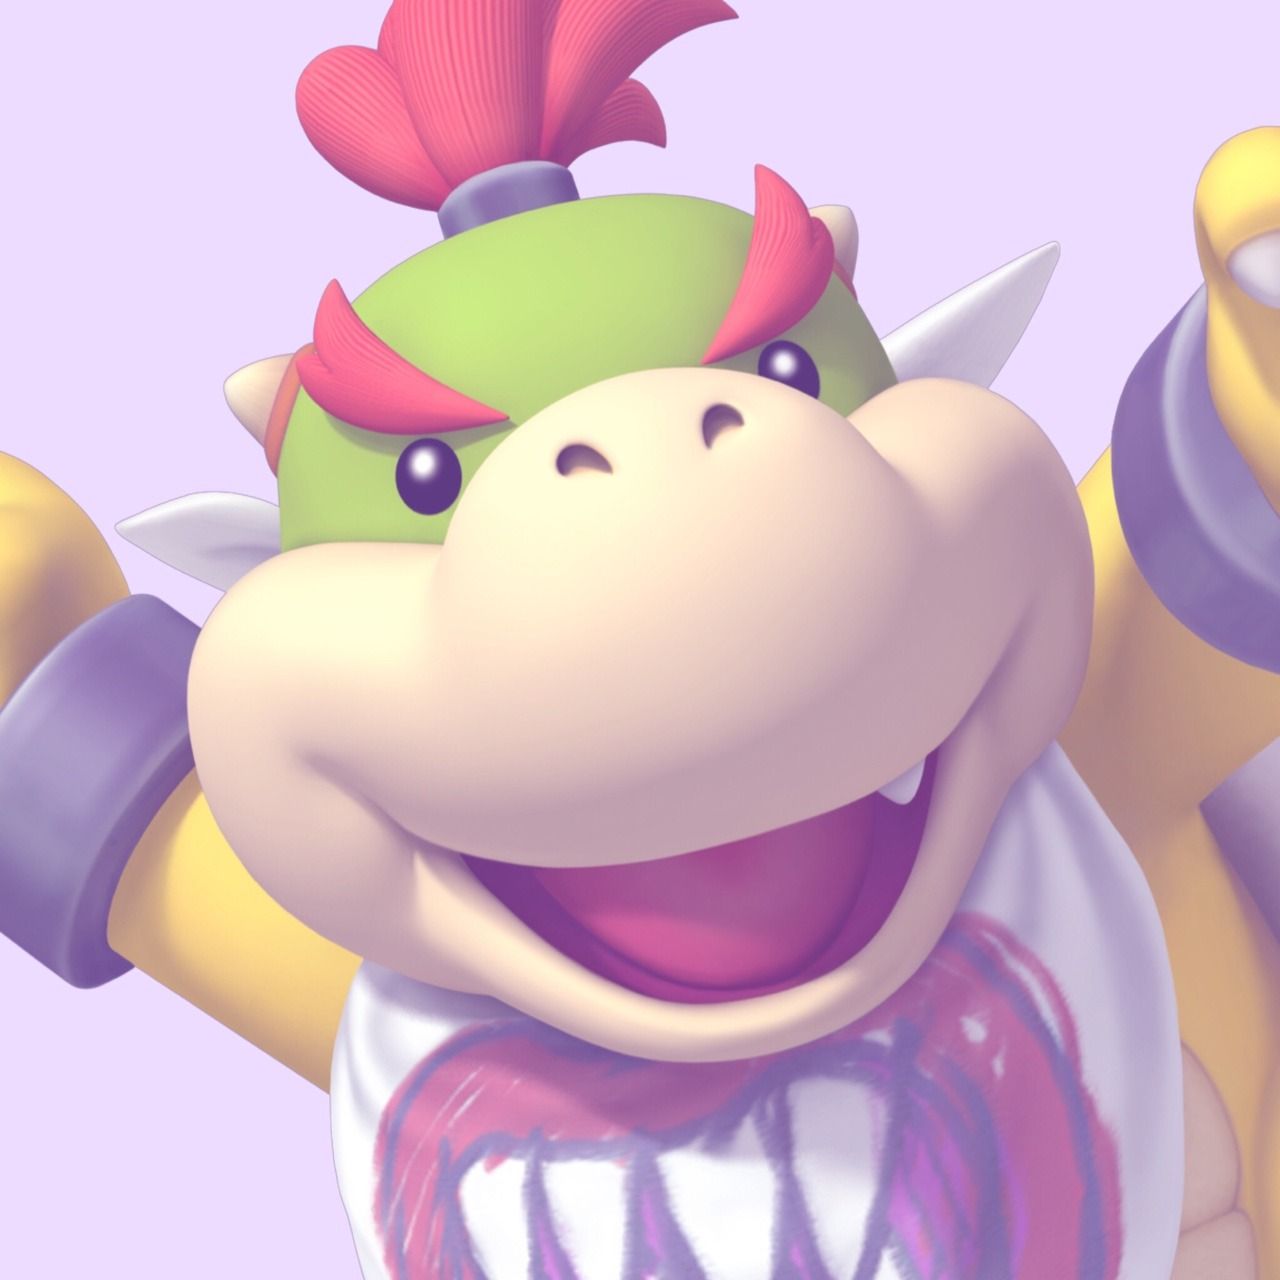 A smiling Bowser holding a tennis racket in each hand. - Bowser